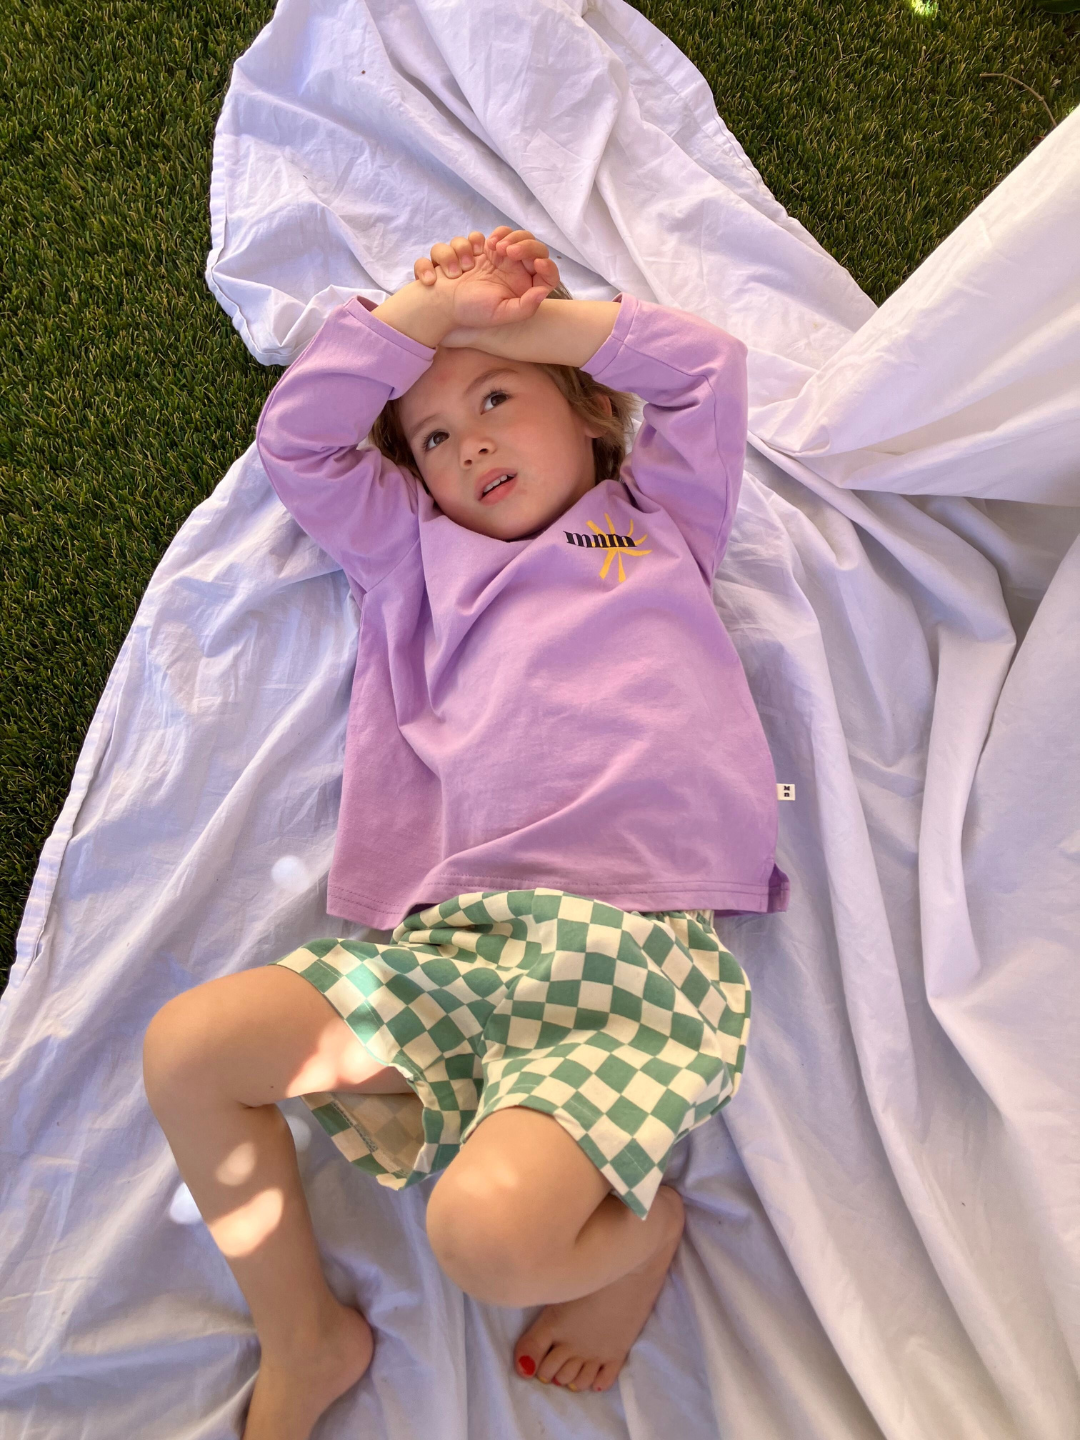 Teal | A child wearing the kids Frankie Short in Teal & Ivory check, paired with a purple long sleeved tshirt with a small graphic on the chest. He is lying on a white picnic cloth on grass.